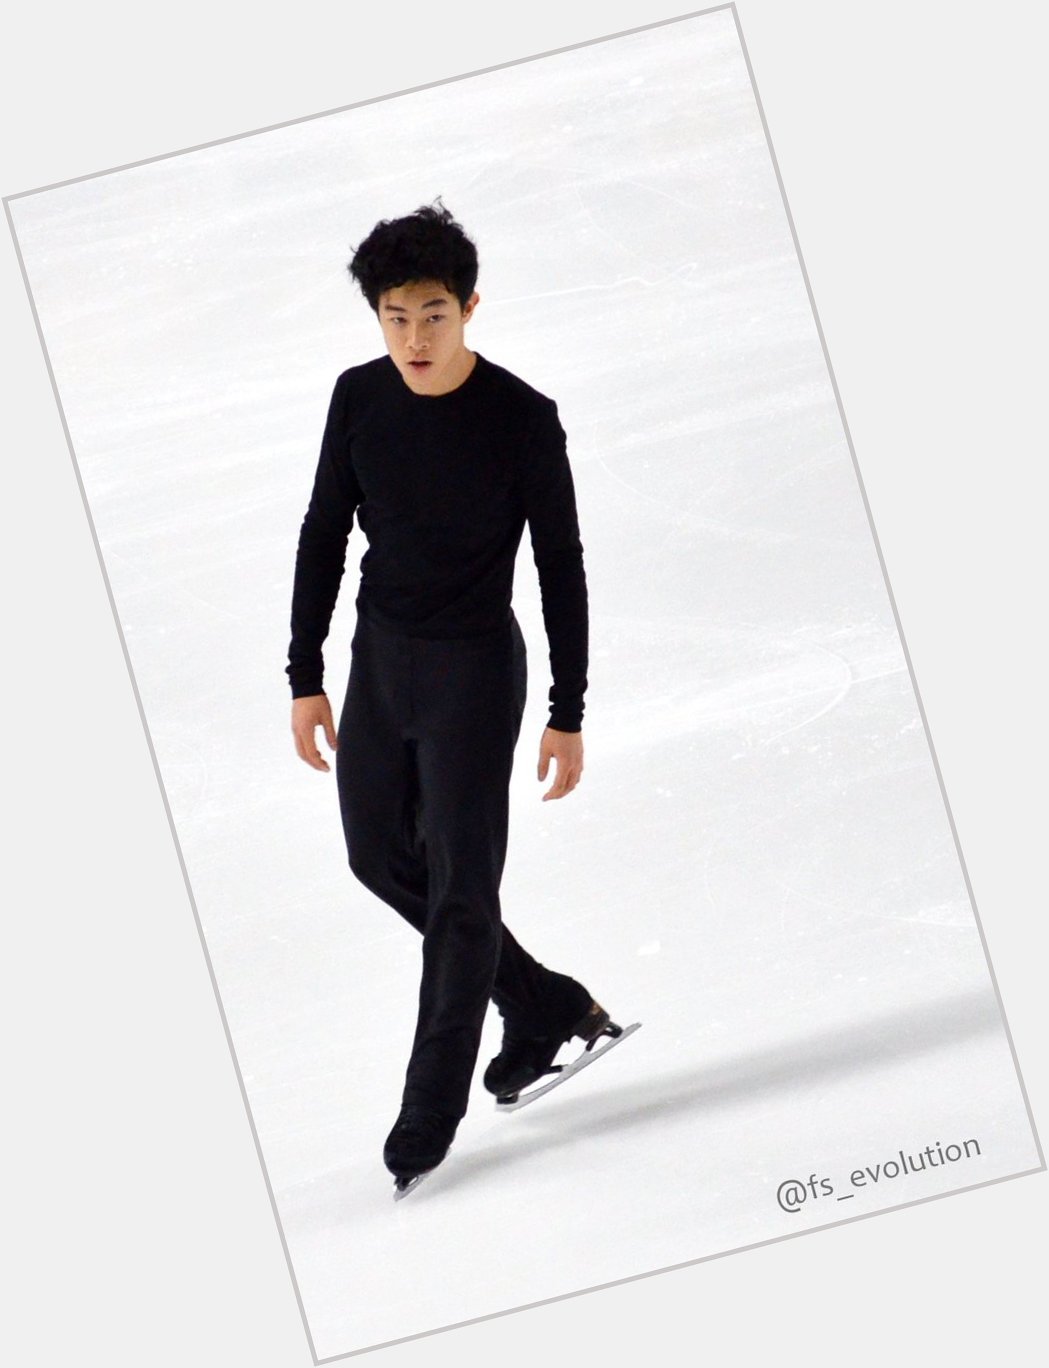 Happy birthday to Nathan Chen - a throwback to his first Sr. International win at Finlandia Trophy! 